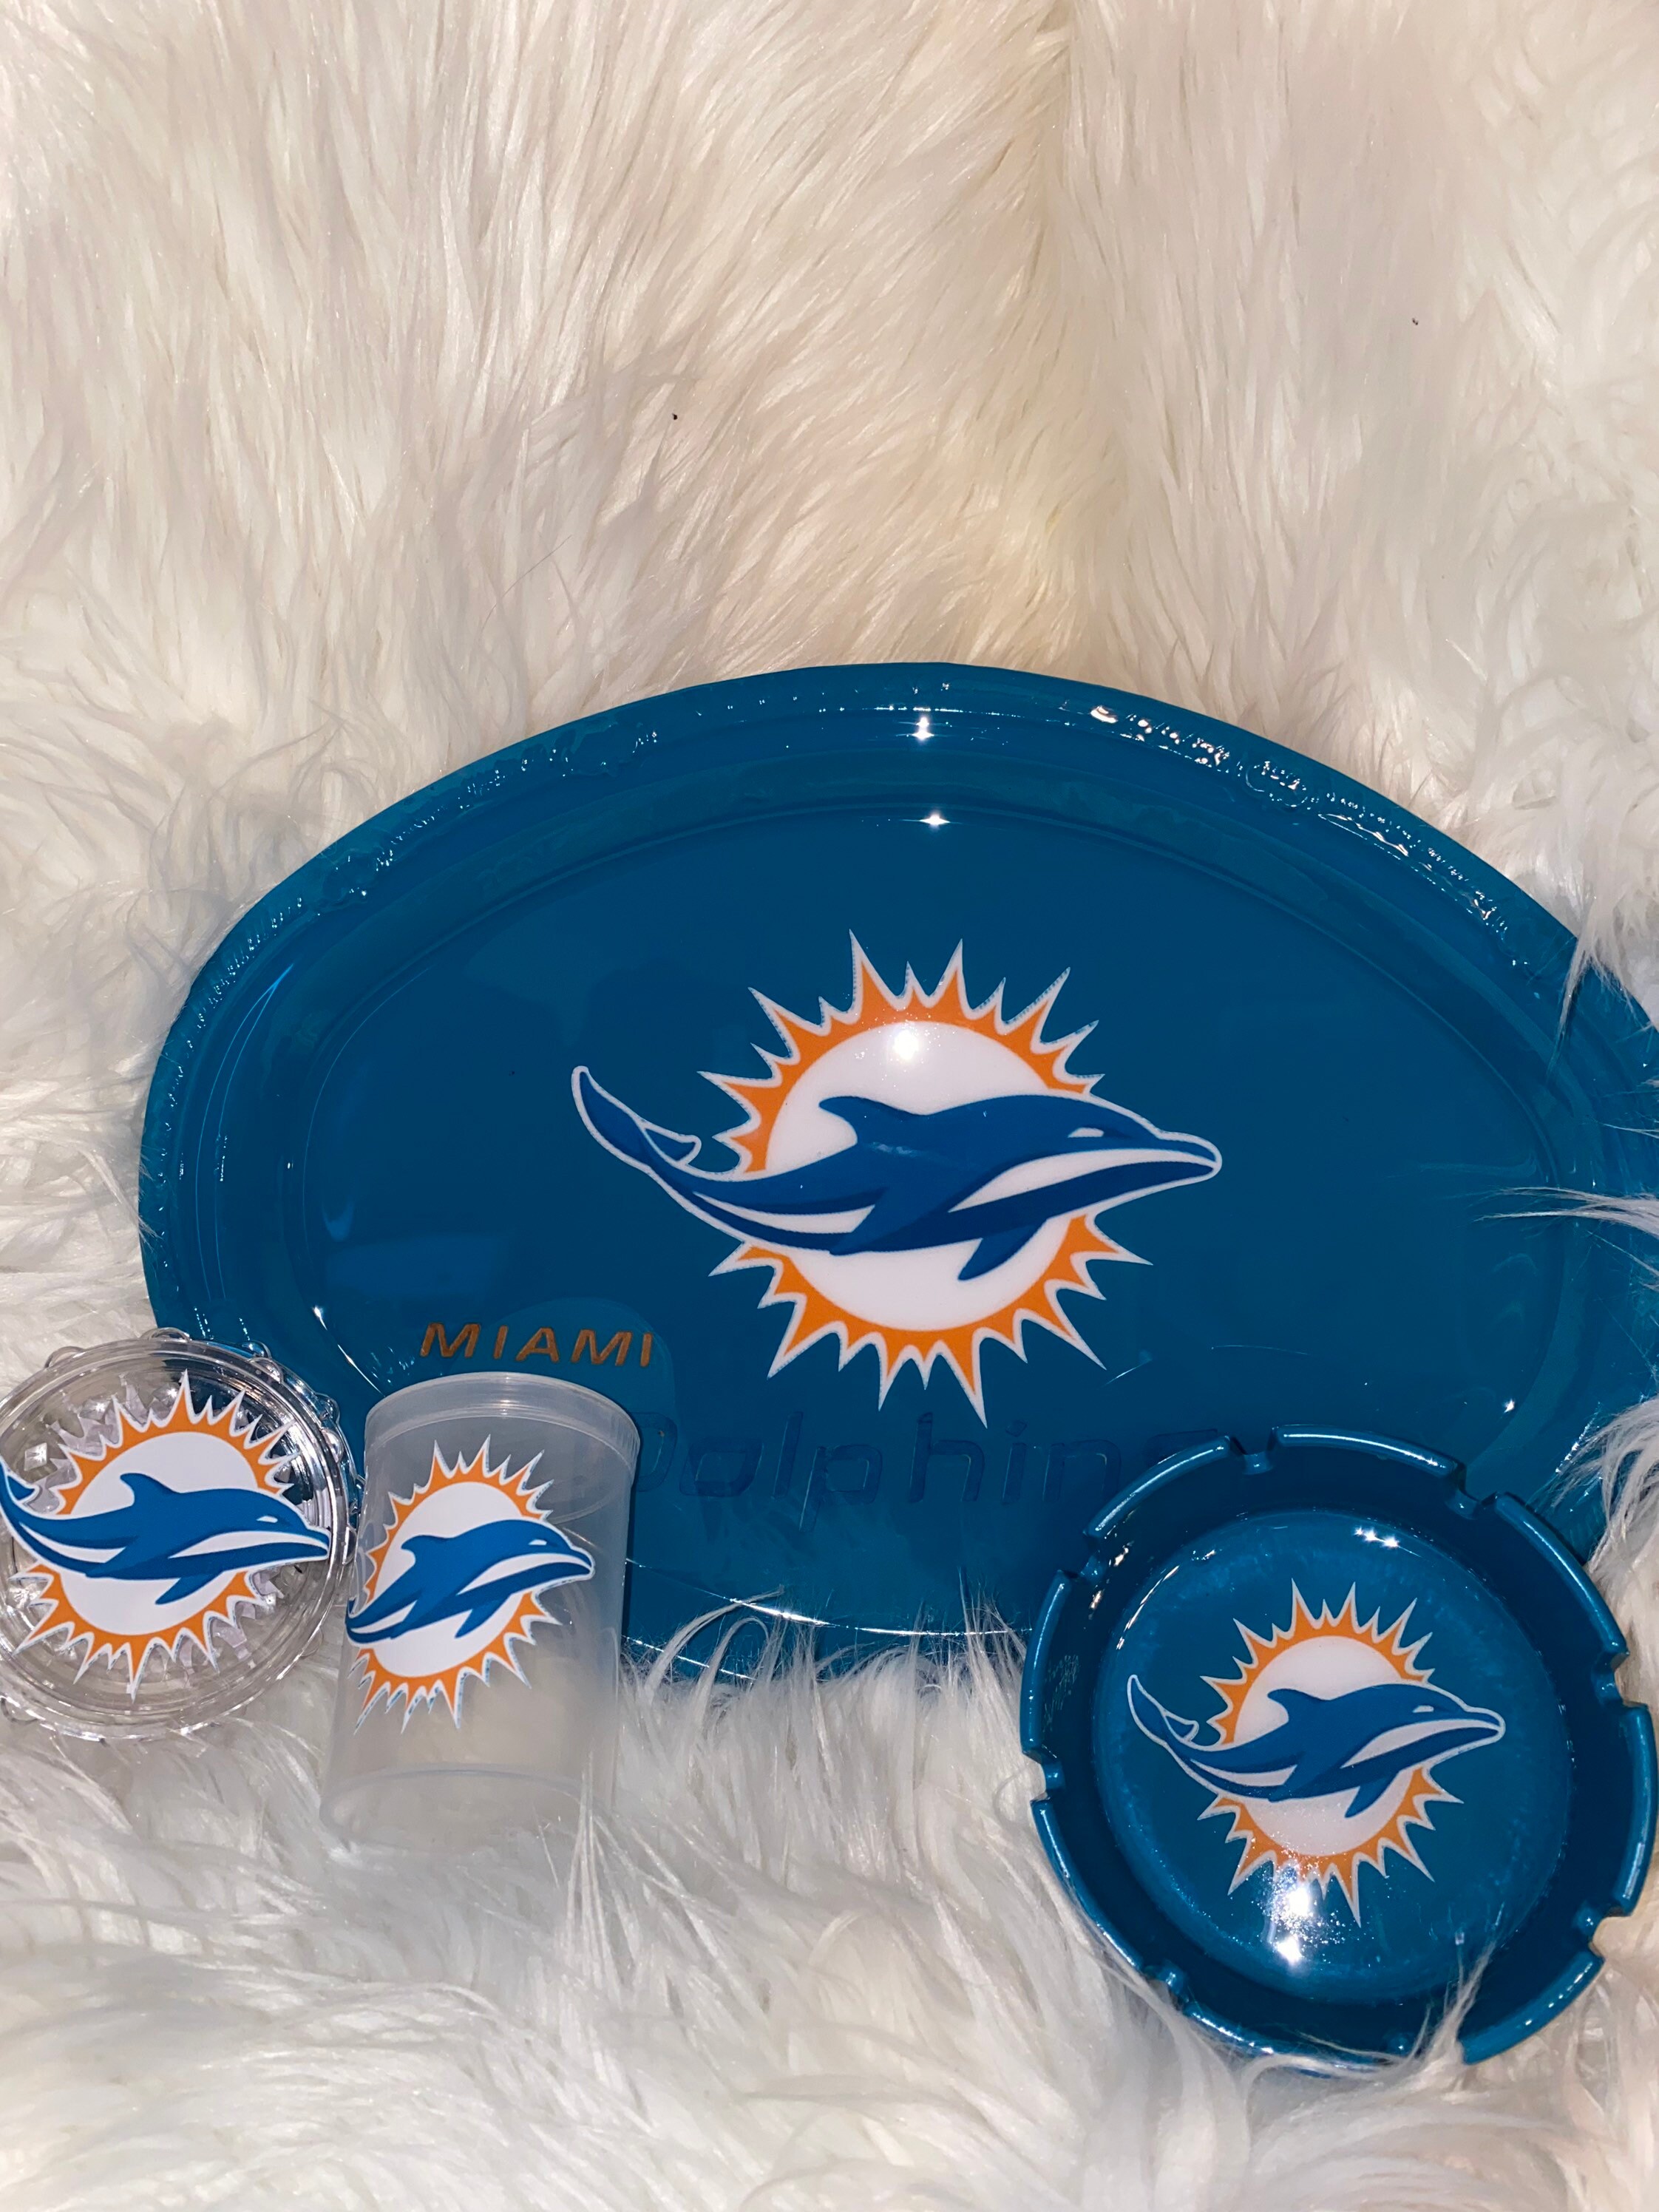  Miami Dolphins Legends and The Islands of the  Bahamas Ink Exclusive Partnership